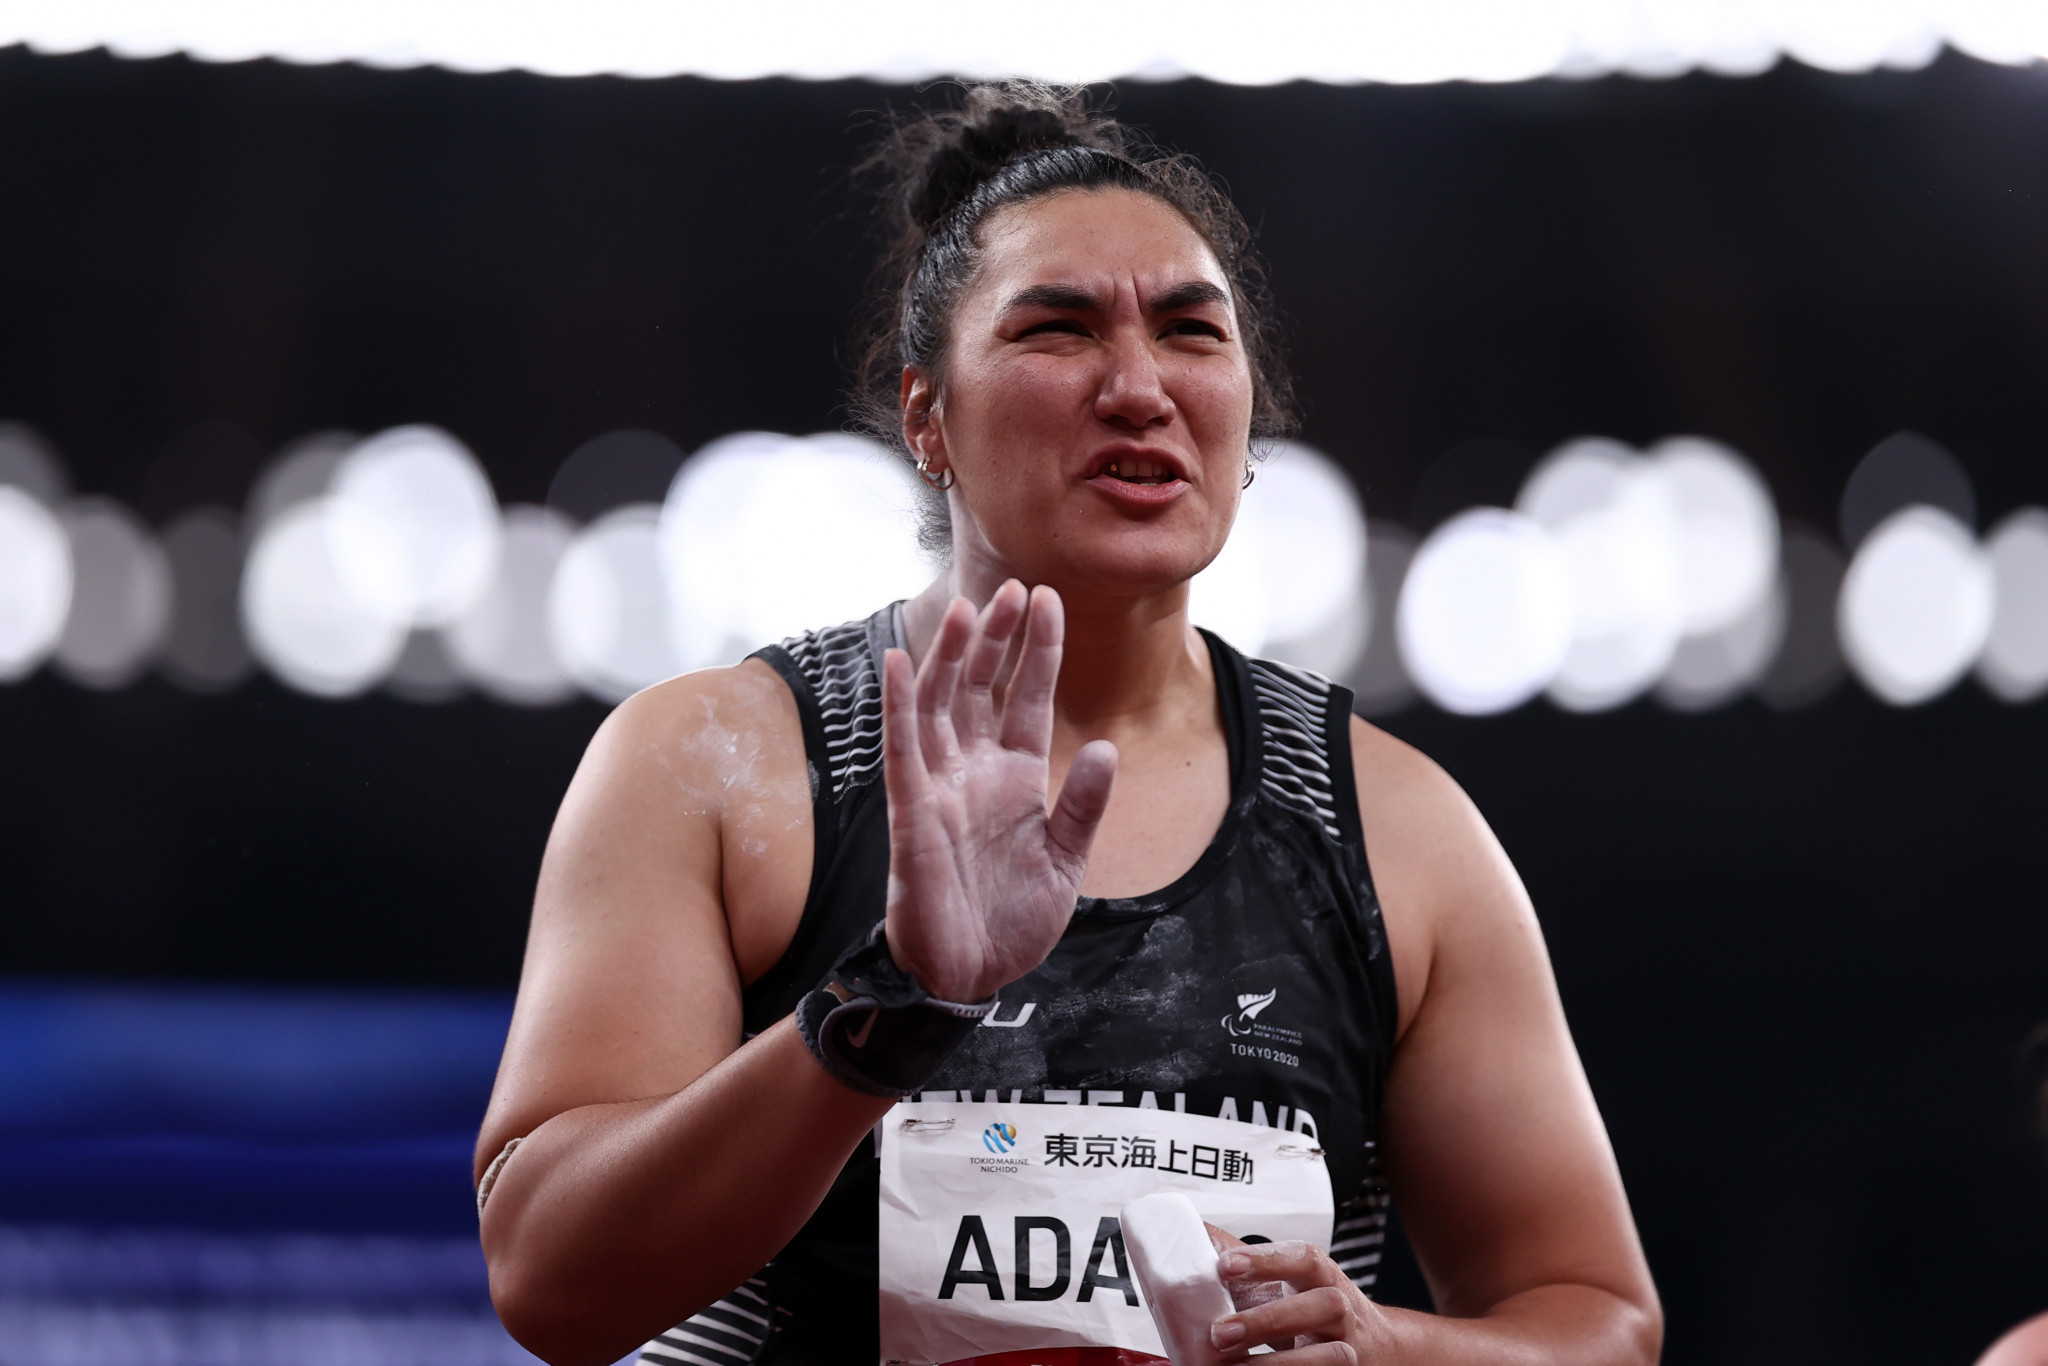 Gold medallist Adams among New Zealand Paralympians to receive official pins following Tokyo 2020